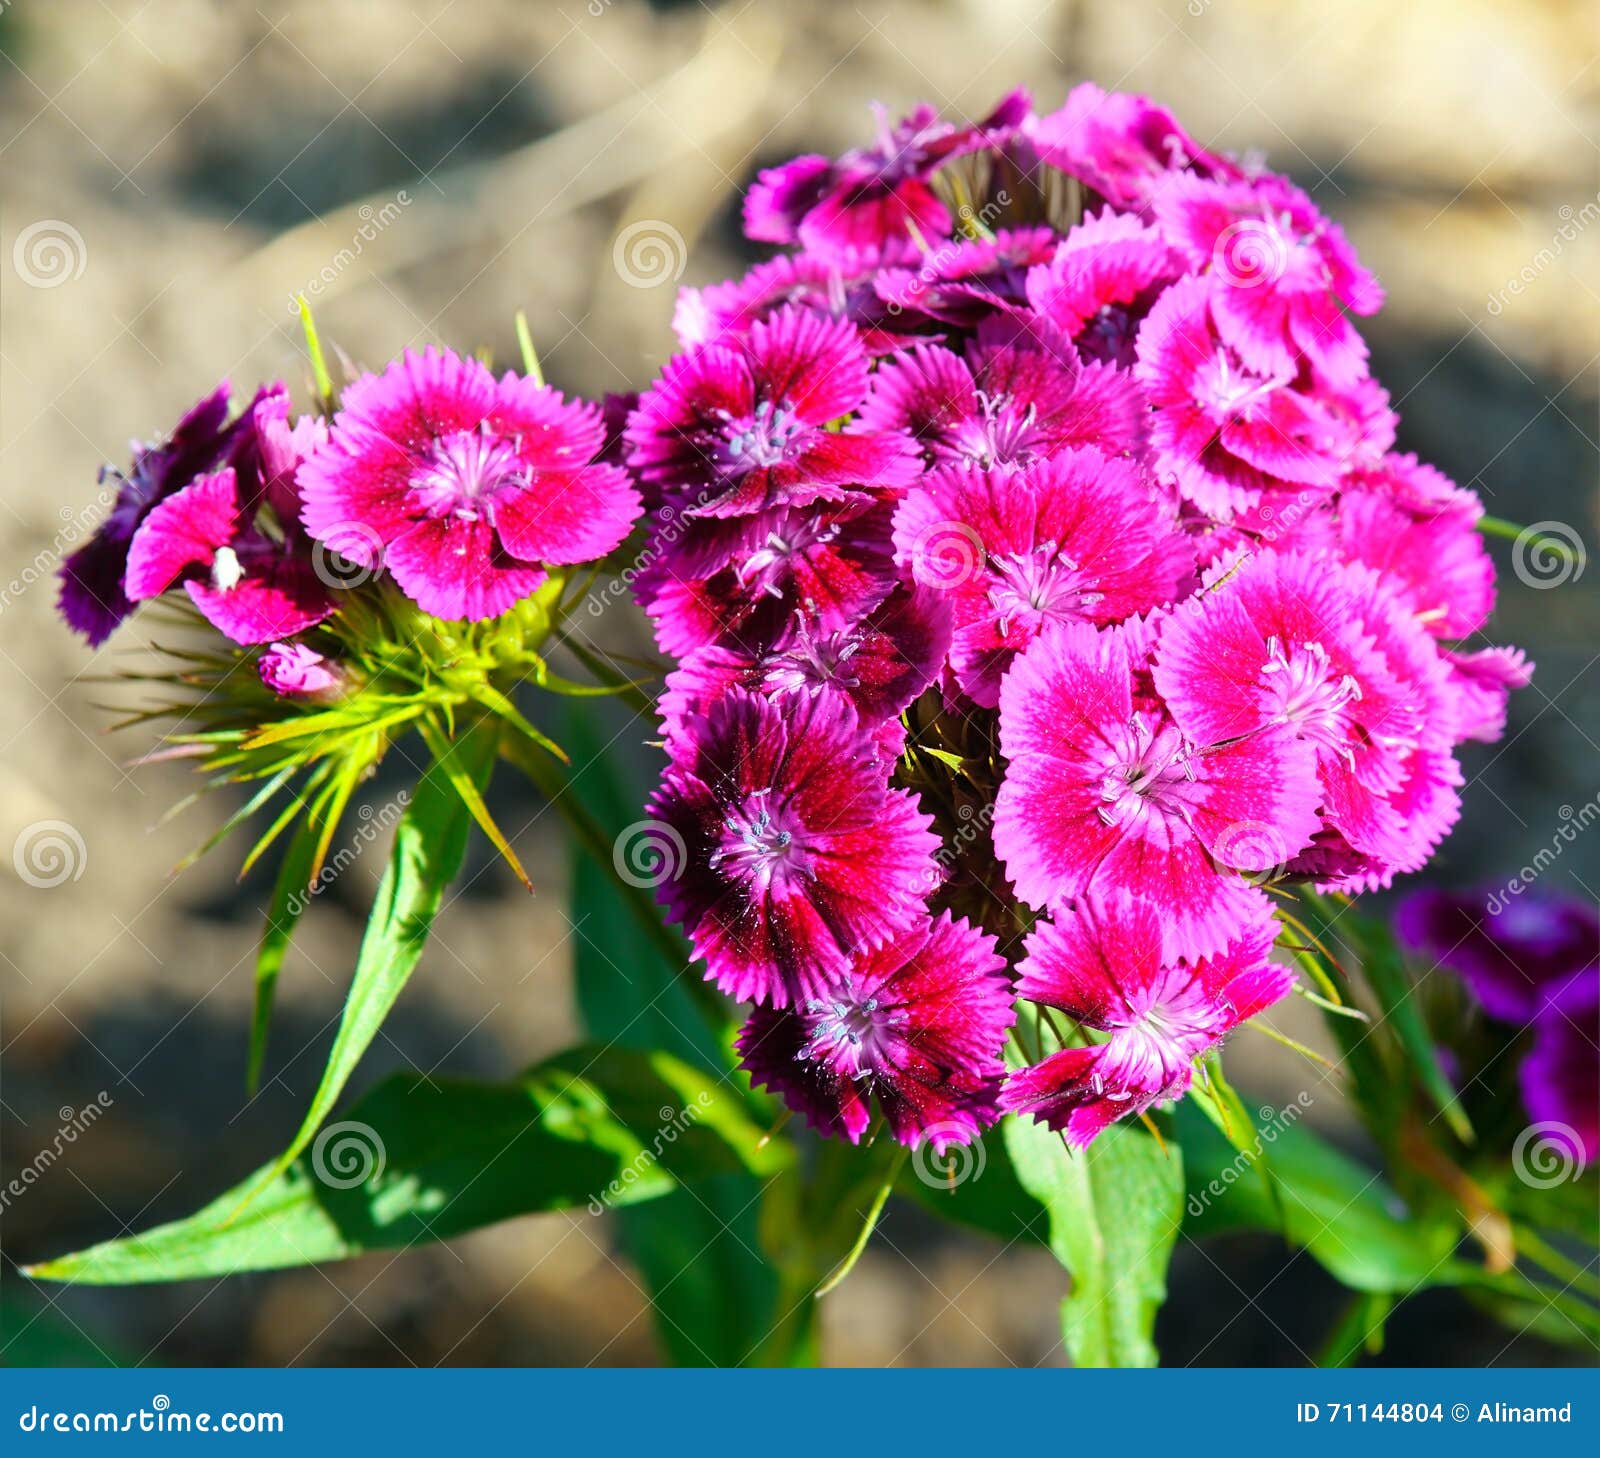 Colorful carnation flowers stock photo. Image of garden - 71144804